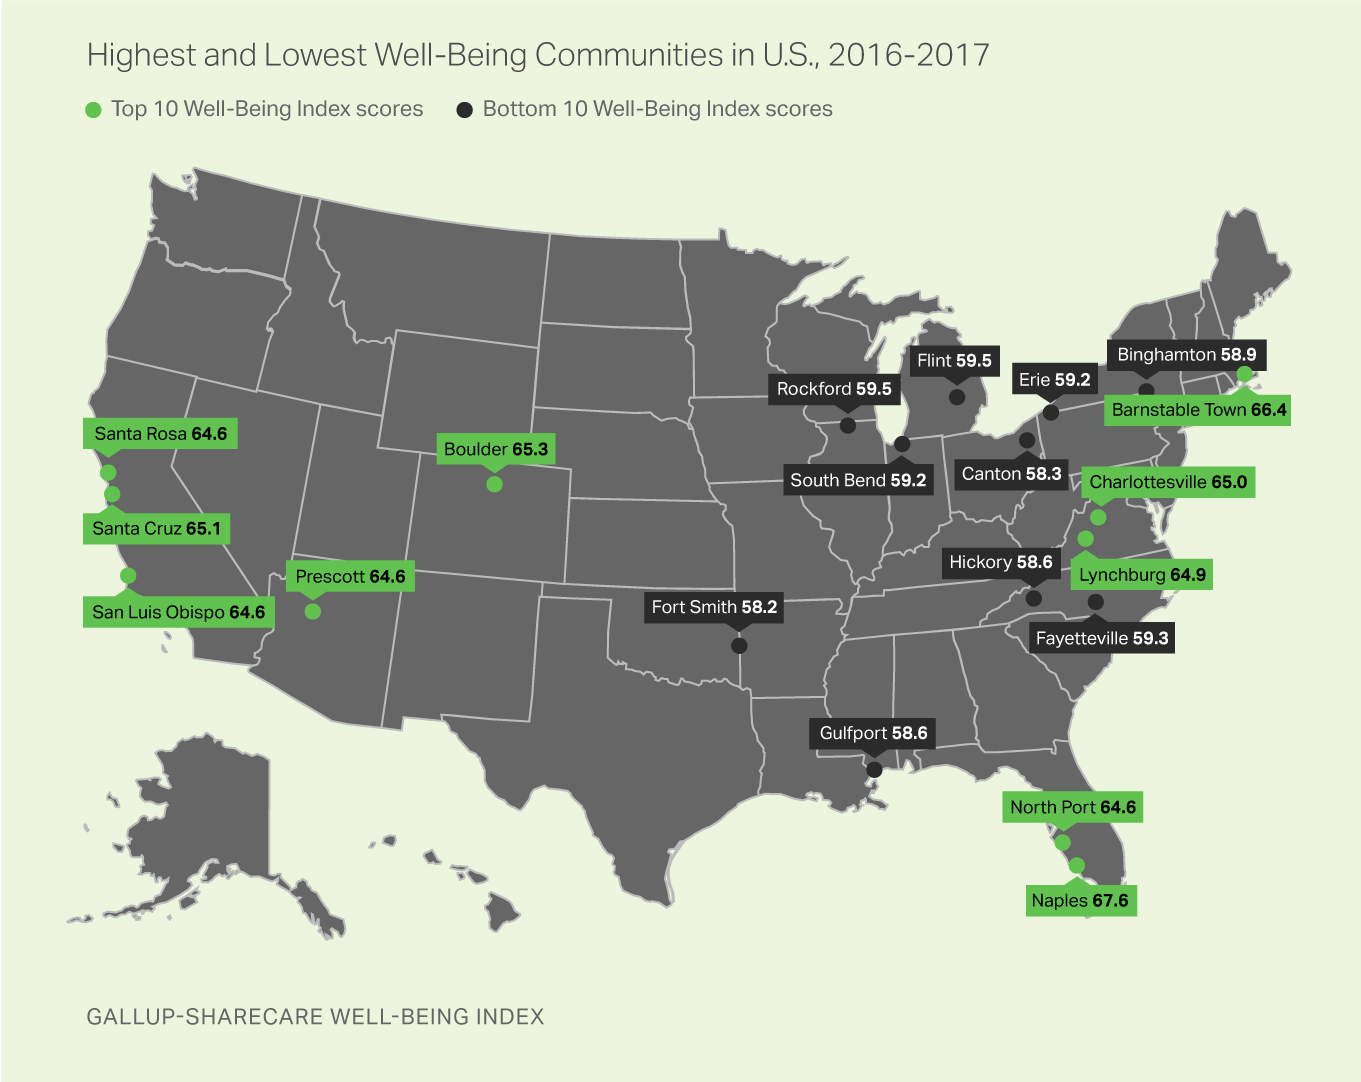 Highest and Lowest Well-Being Communities in U.S., 2016-2017